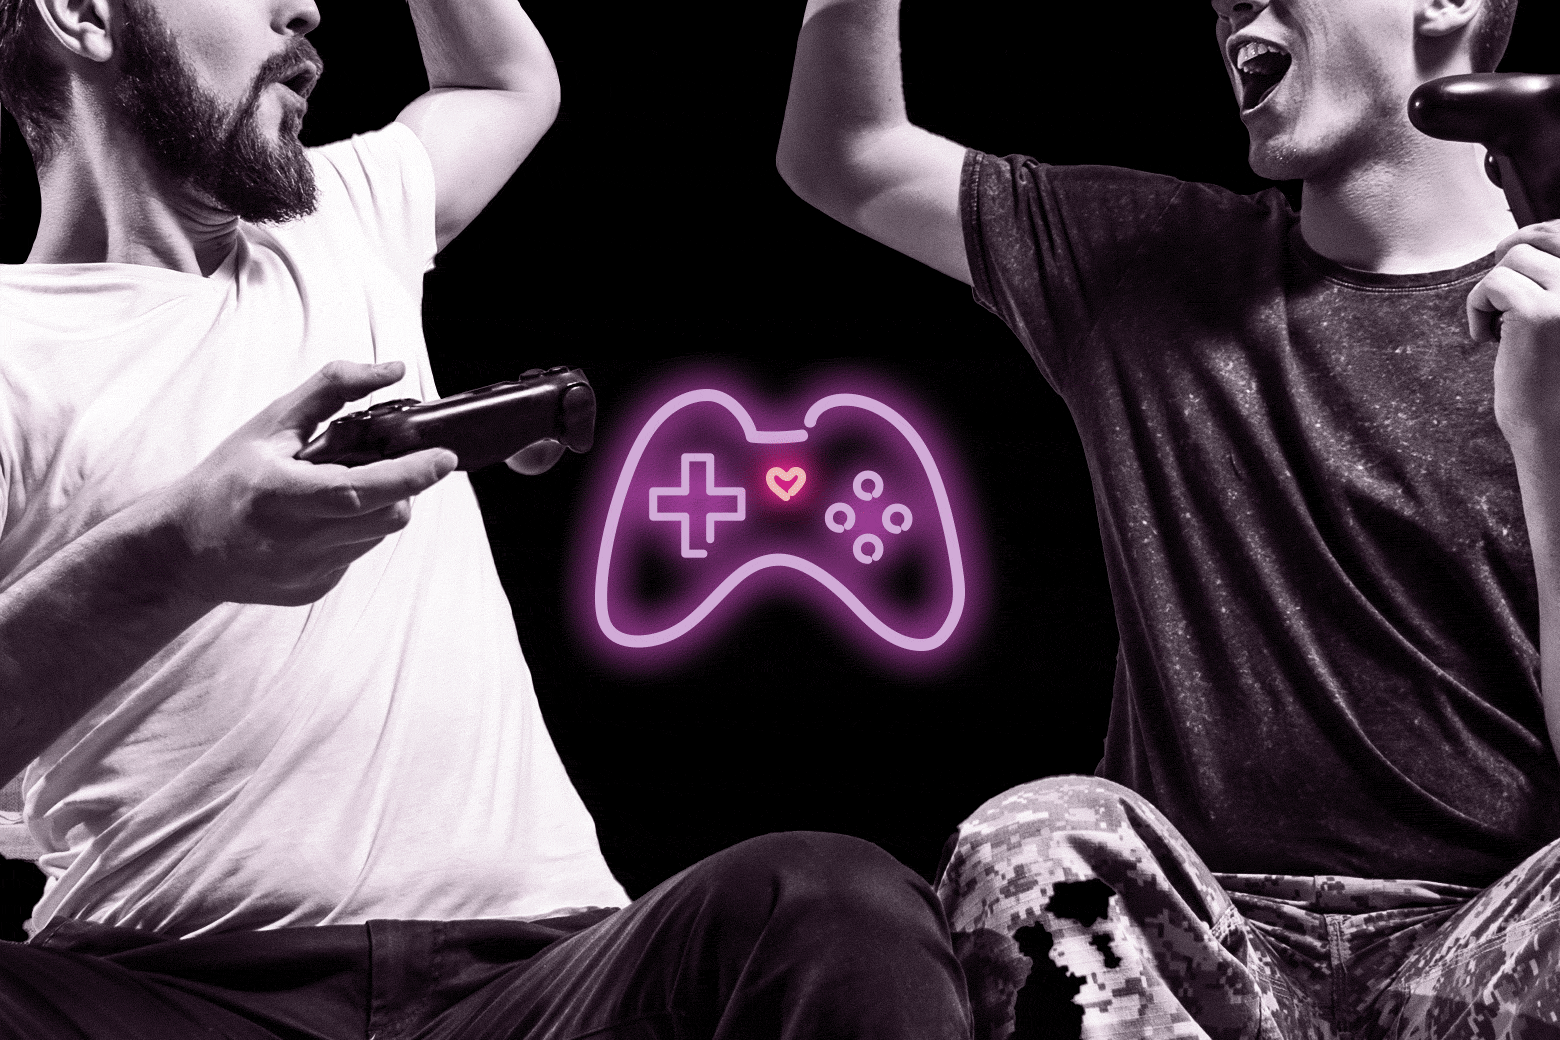 Two bros high-five each other; an illustrated video game controller floats in-between them with a heart button.